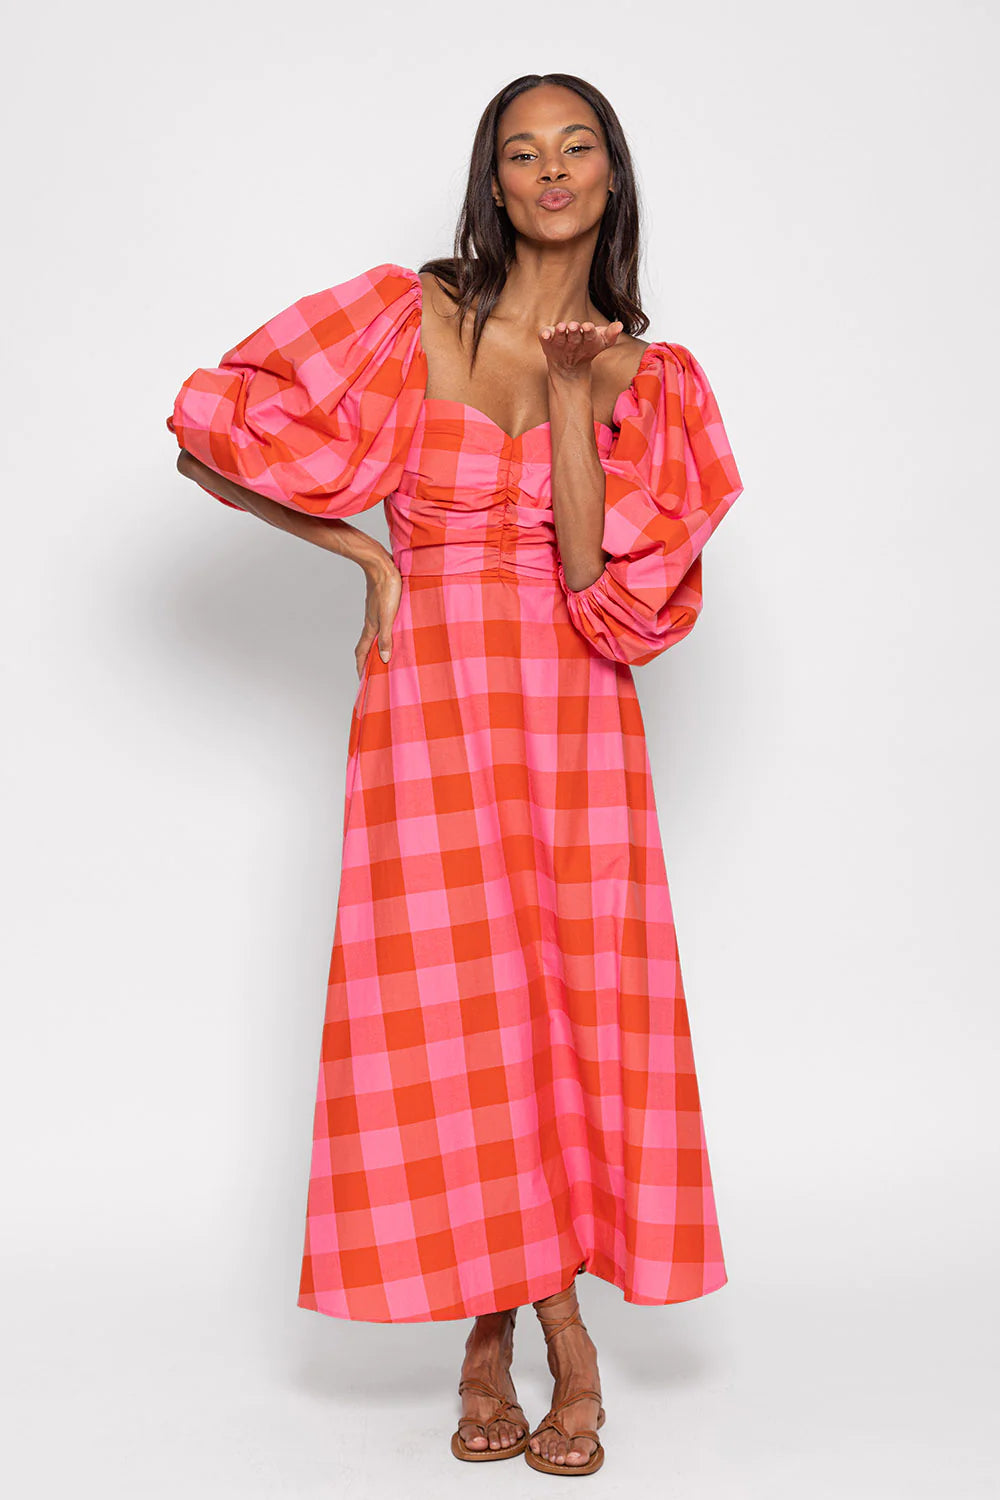 Large gingham red and pink dress with huge puff sleeves sweetheart neckline and A line midi/maxi length skirt